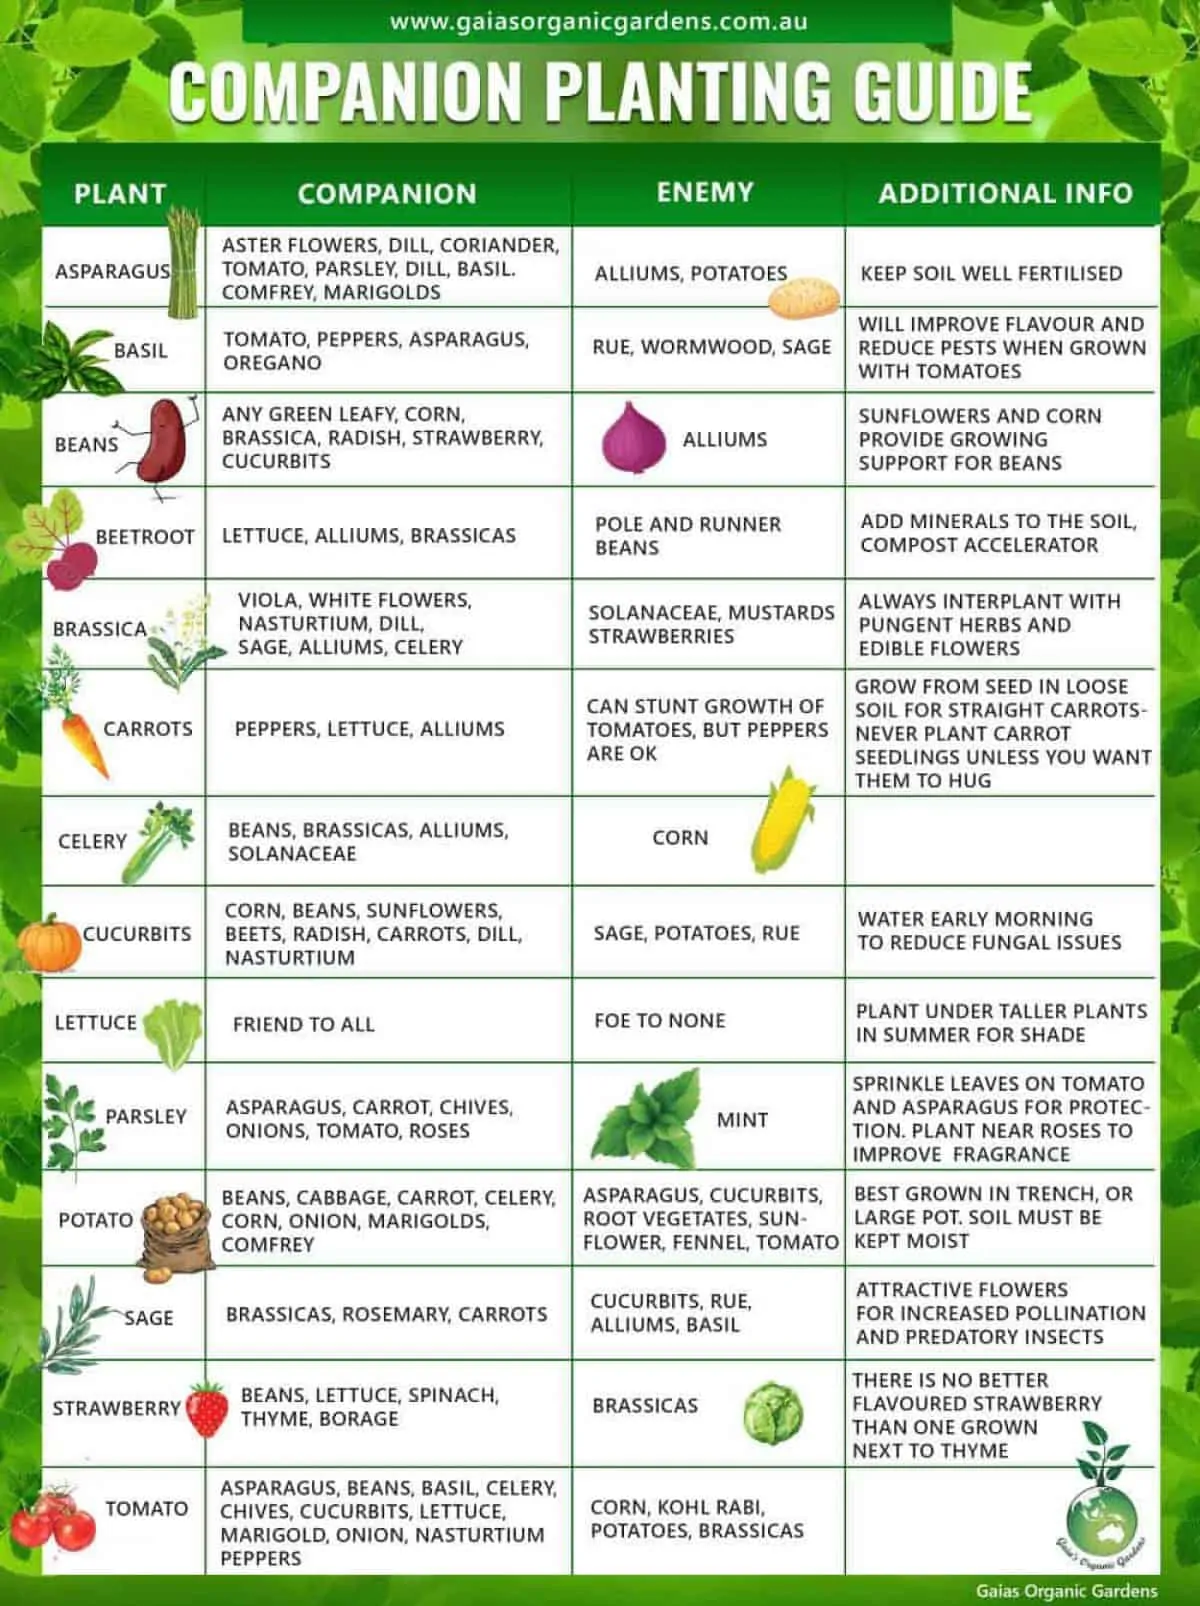 Collection of Companion Planting Charts, Guides, and PDFs World Water